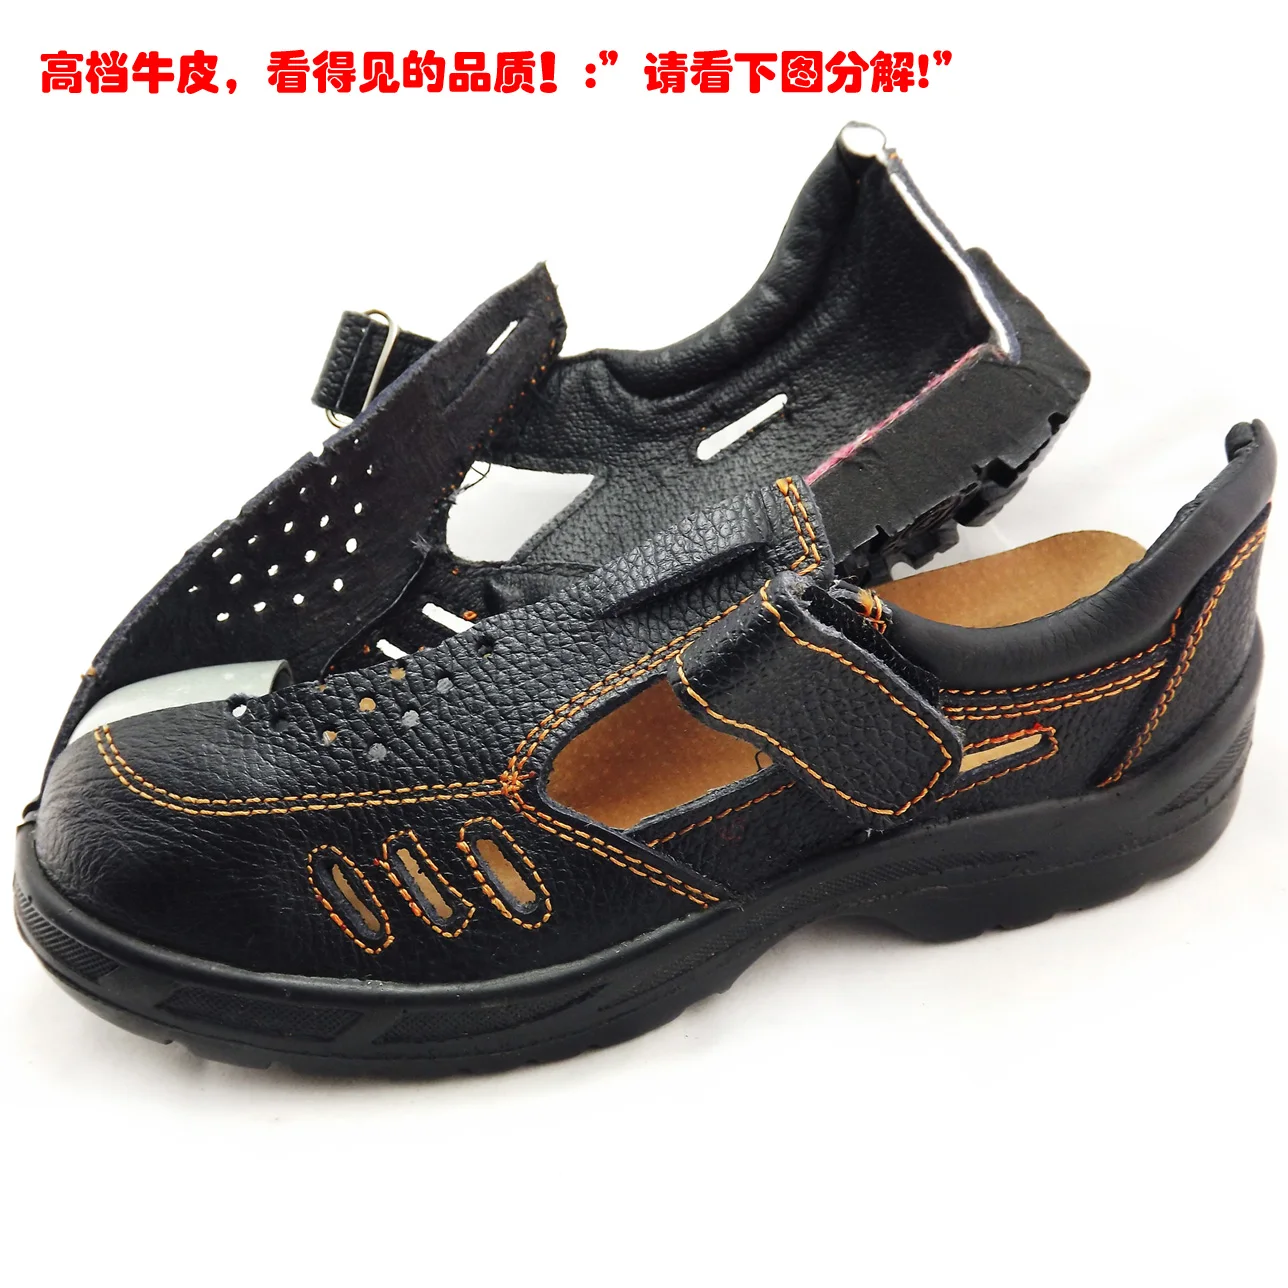 Quality leather safety shoes breathable 